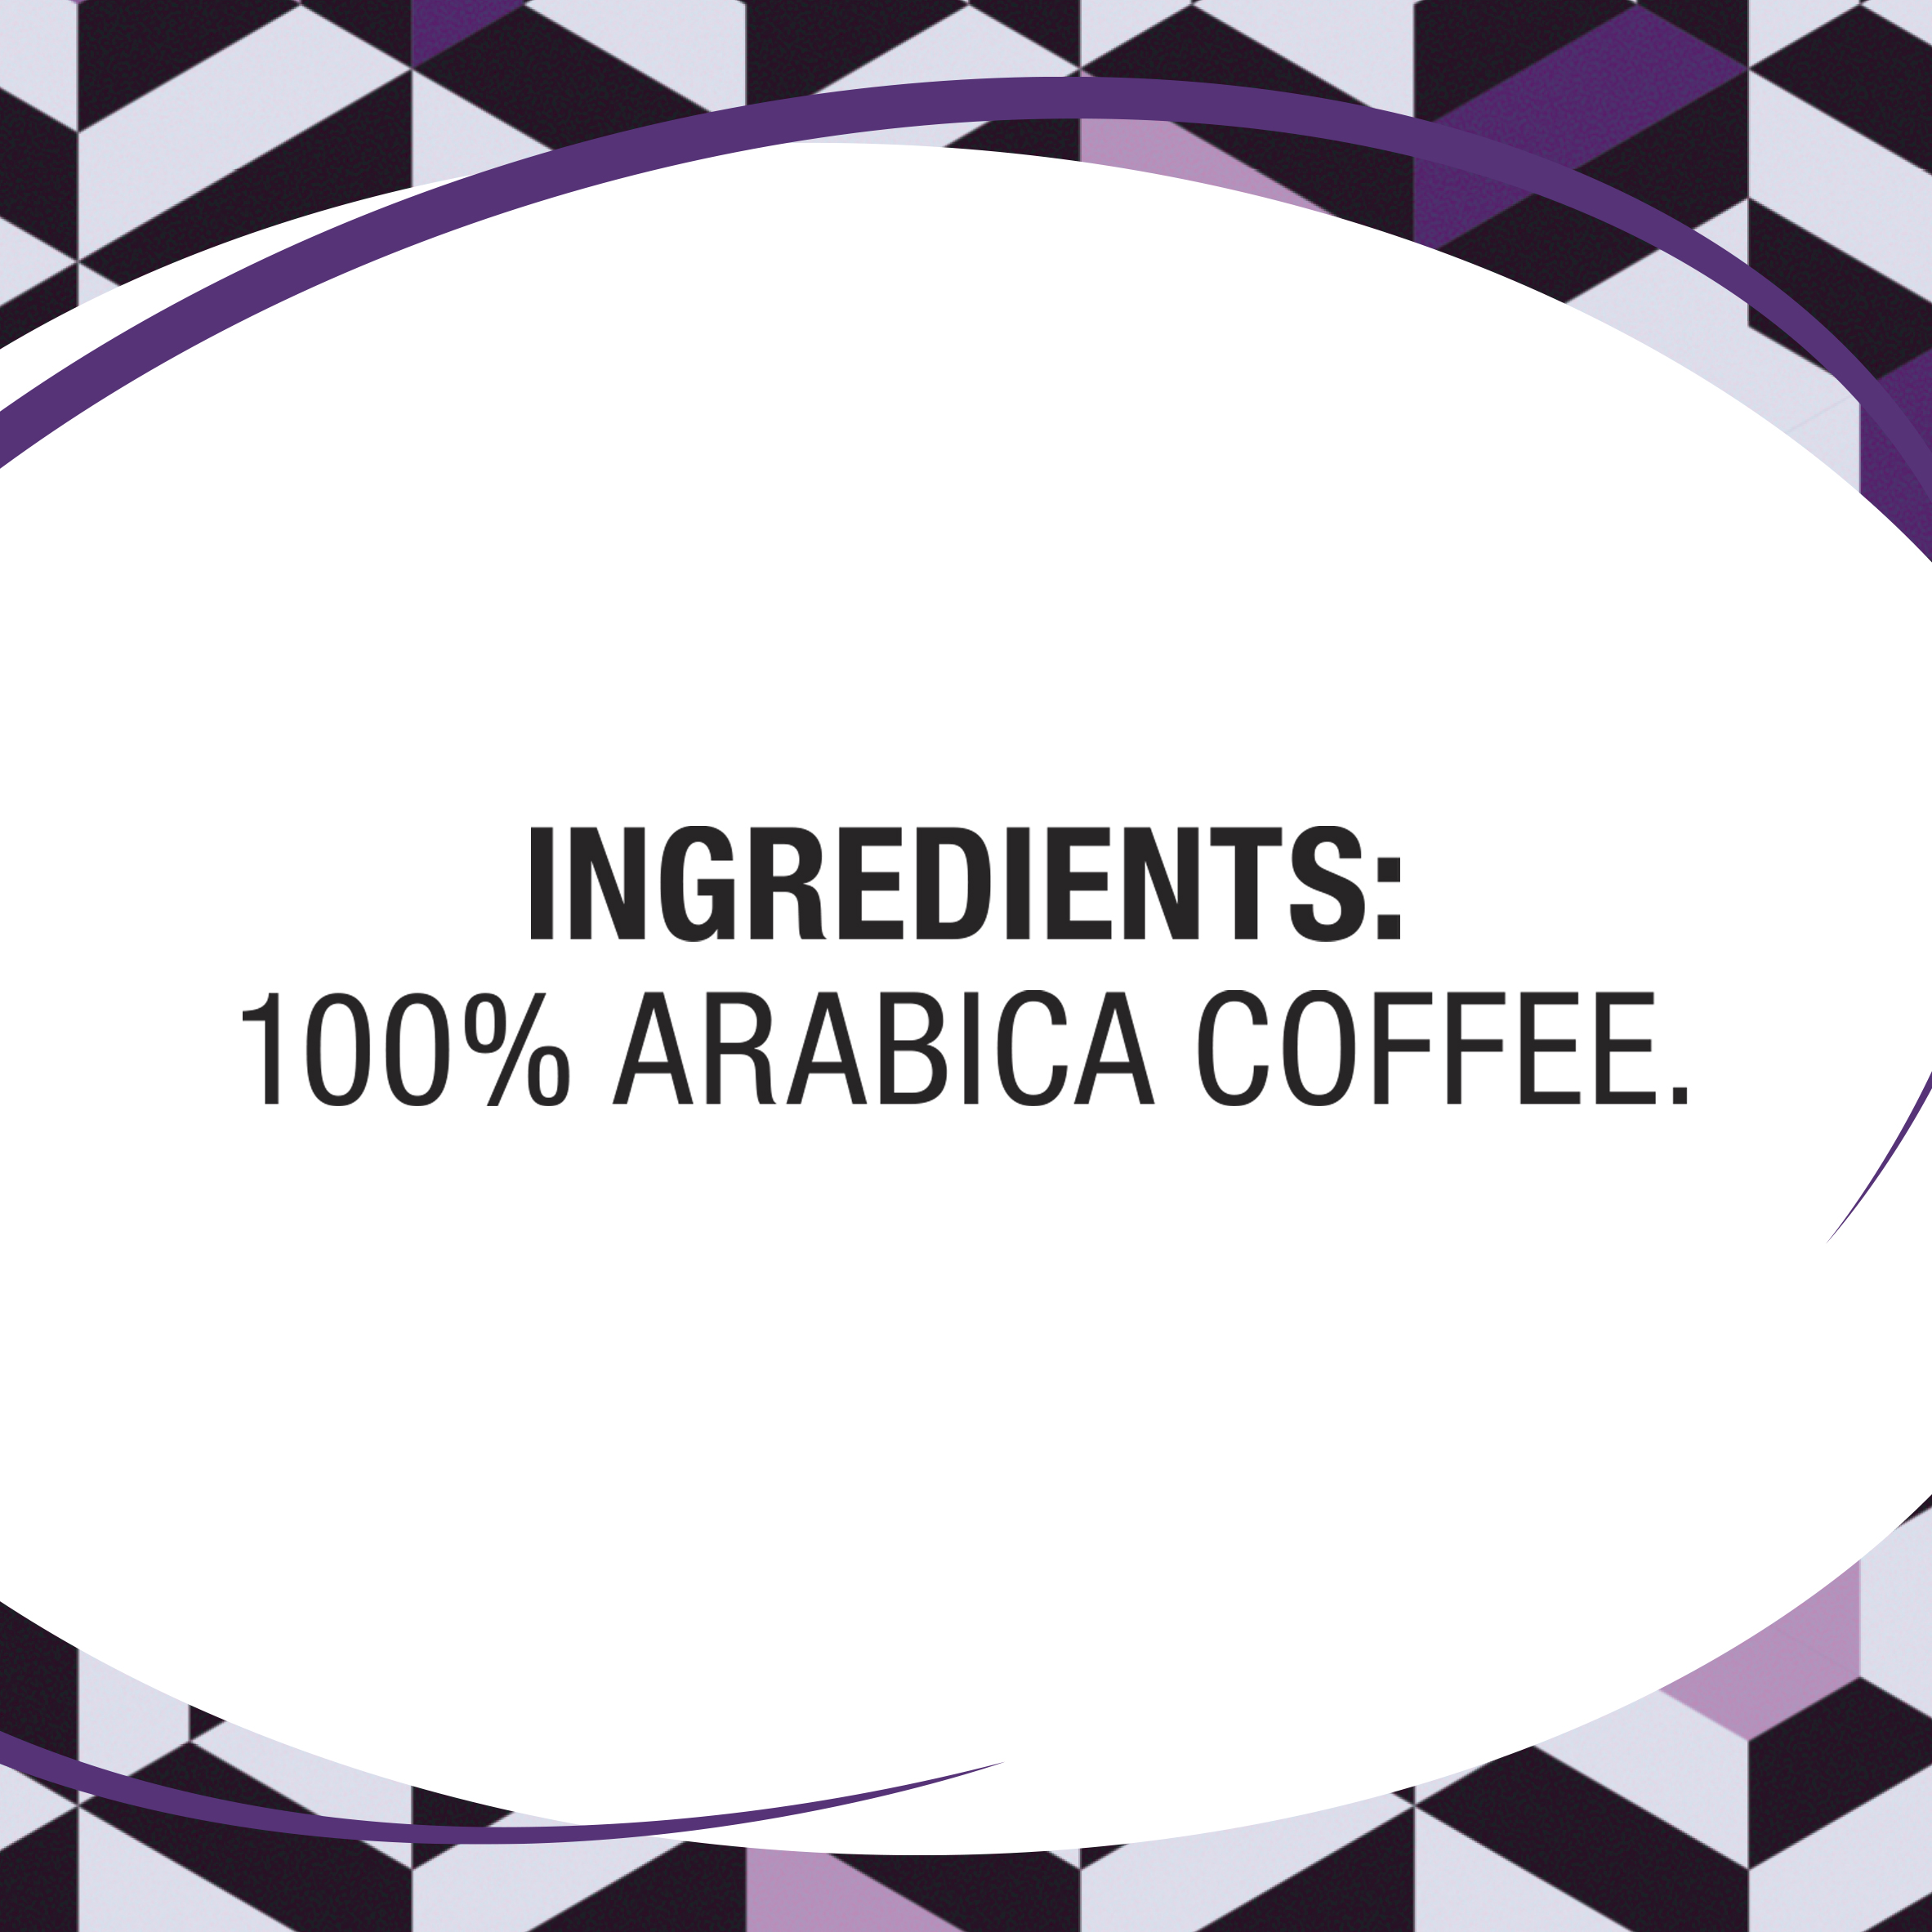 Great Value 100% Arabica French Dark Roast Ground Coffee Pods, 12 Ct - image 4 of 9